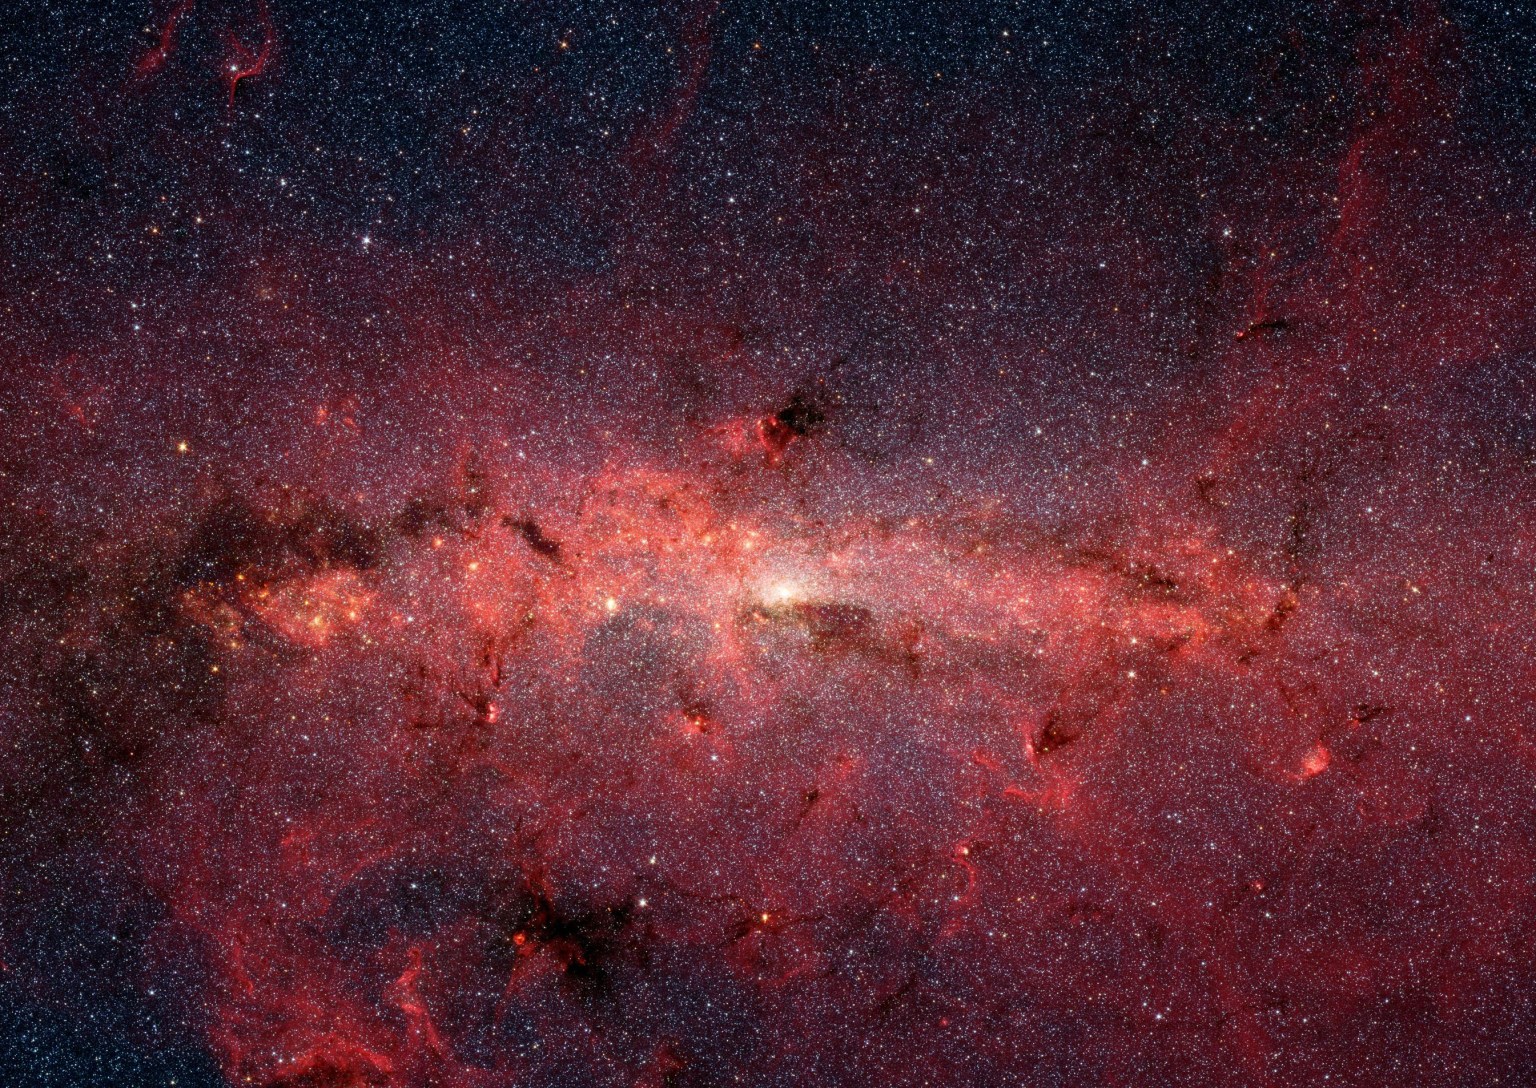 Spitzer Space Telescope's infrared cameras penetrate much of the dust, revealing the stars of the crowded galactic center region of our Milky Way.